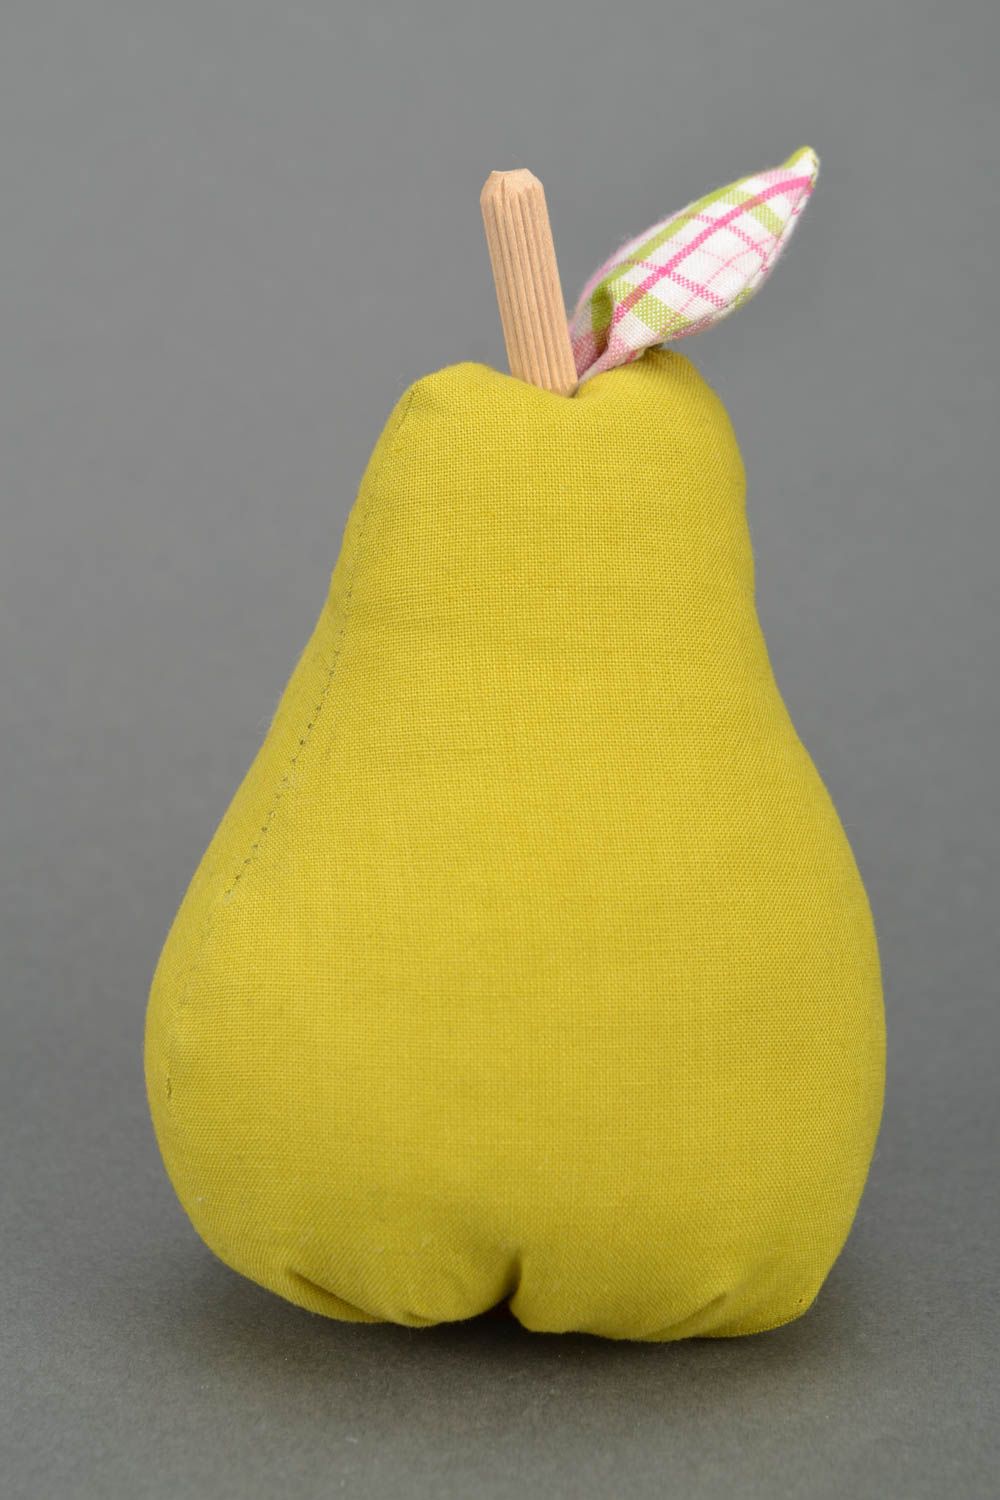 Homemade soft toy Pear photo 3